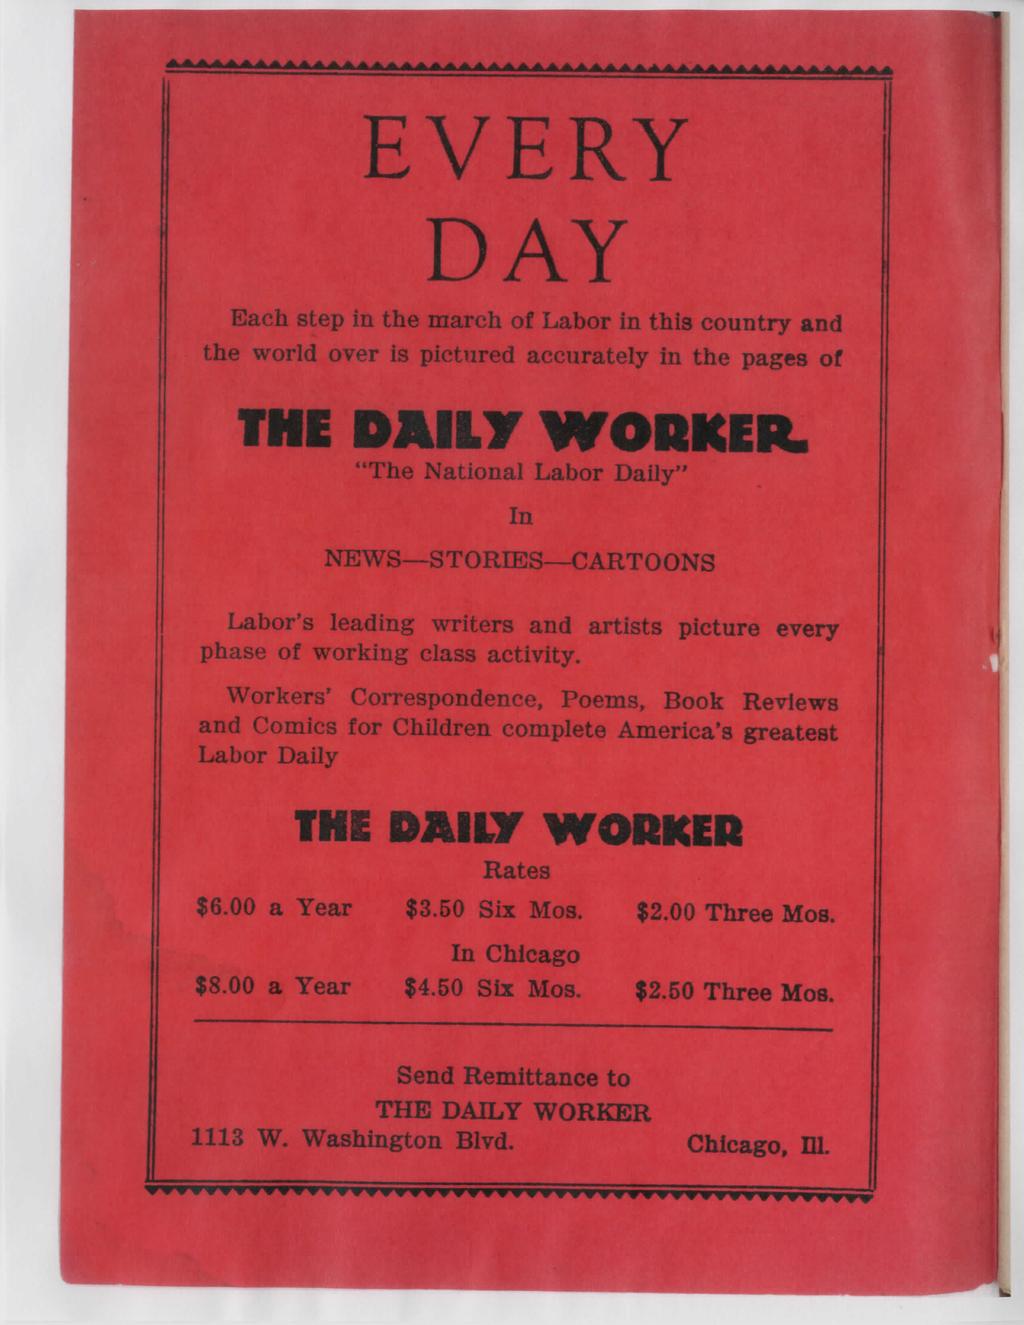 EVERY DAY Each step in the march of Labor in this country and the world over is pictured accurately in the pages of THE DAILY WORKER.